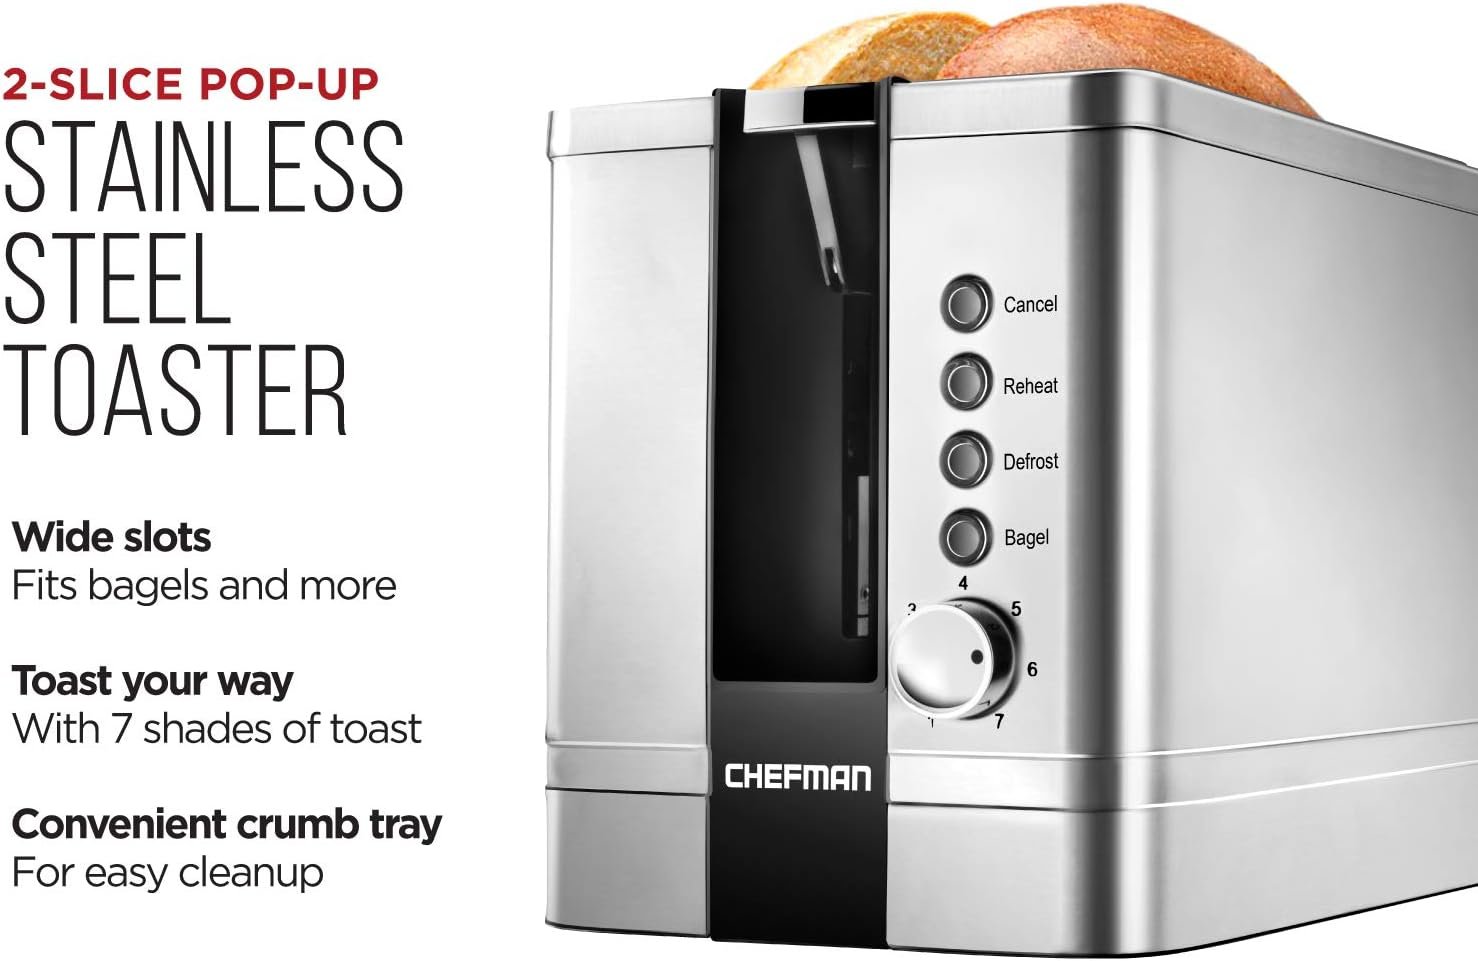 Chefman 2-Slice Pop-Up Stainless Steel Toaster w/ 7 Shade Settings, Extra Wide Slots for Toasting Bagels, Defrost/Reheat/Cancel Functions, Removable Crumb Tray, 850W, 120V, Silver